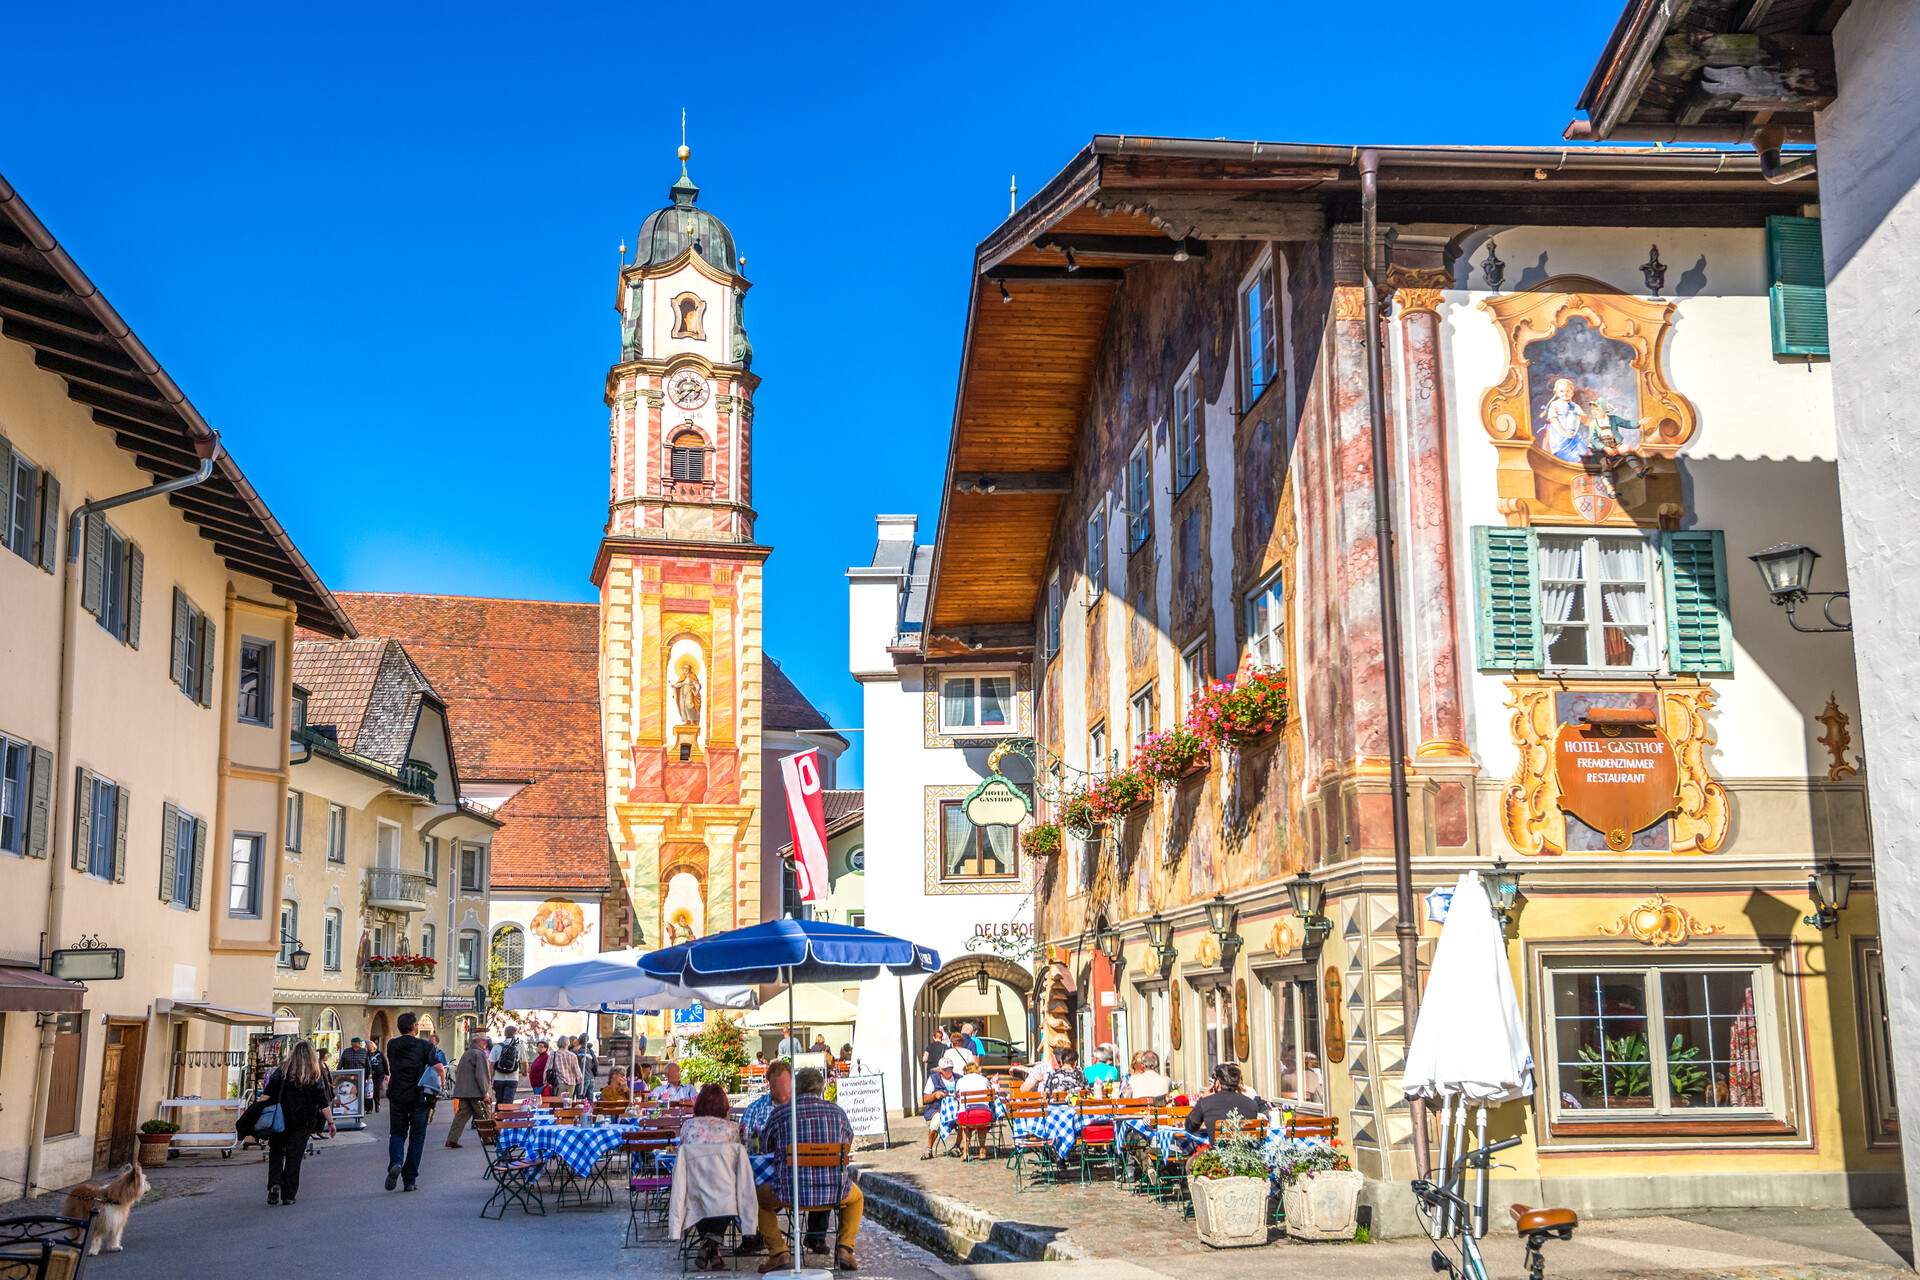 A crowded street with outdoor dining areas surrounded by restaurants and shops and a view of a church's belfry.